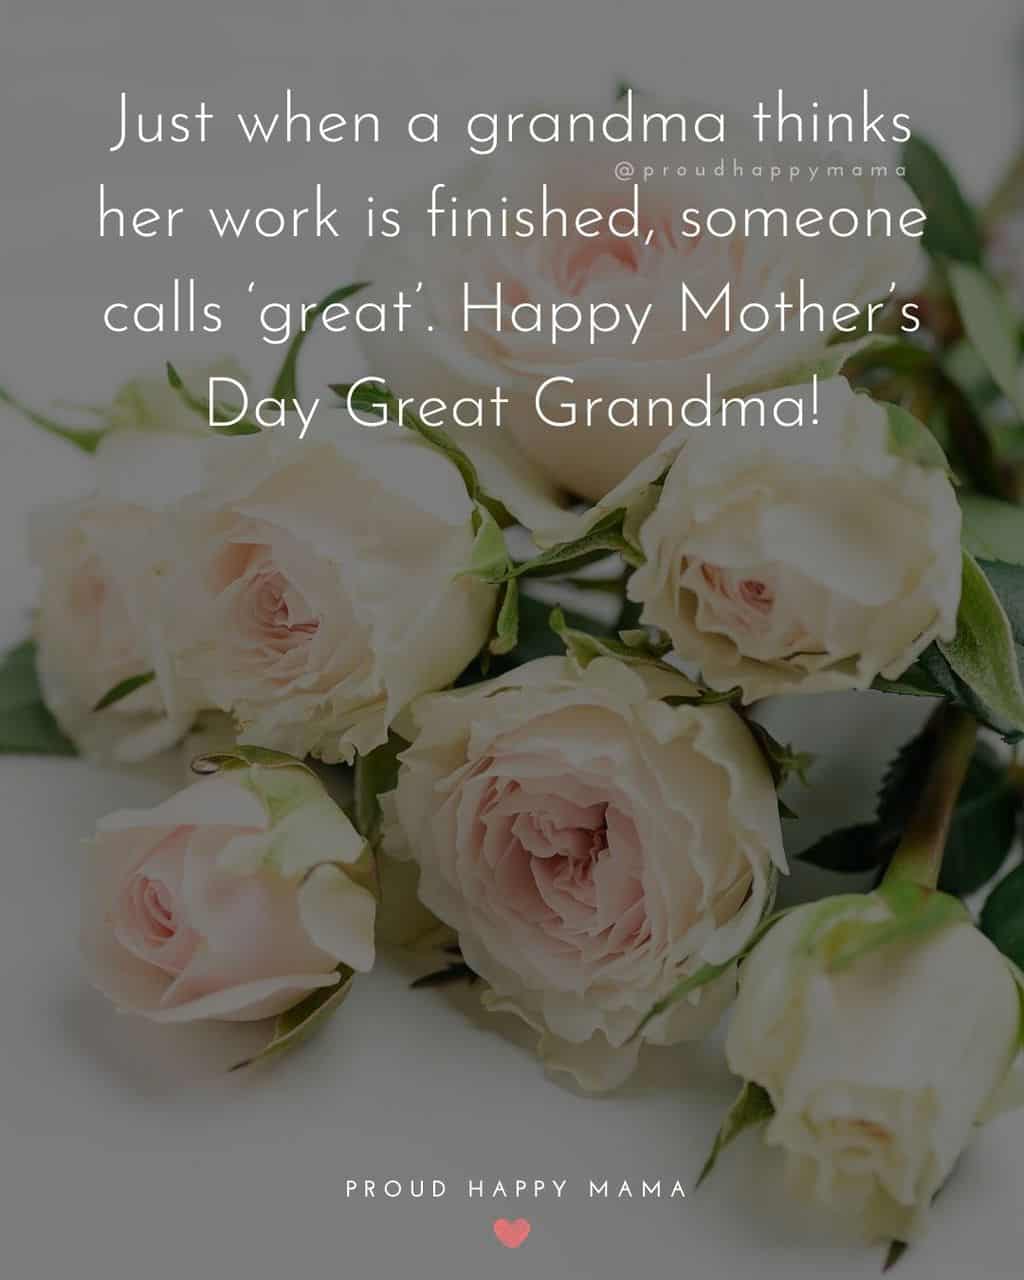 Happy Mothers Day Quotes To Grandma - Just when a grandma thinks her work is finished, someone calls ‘great’. Happy Mother’s